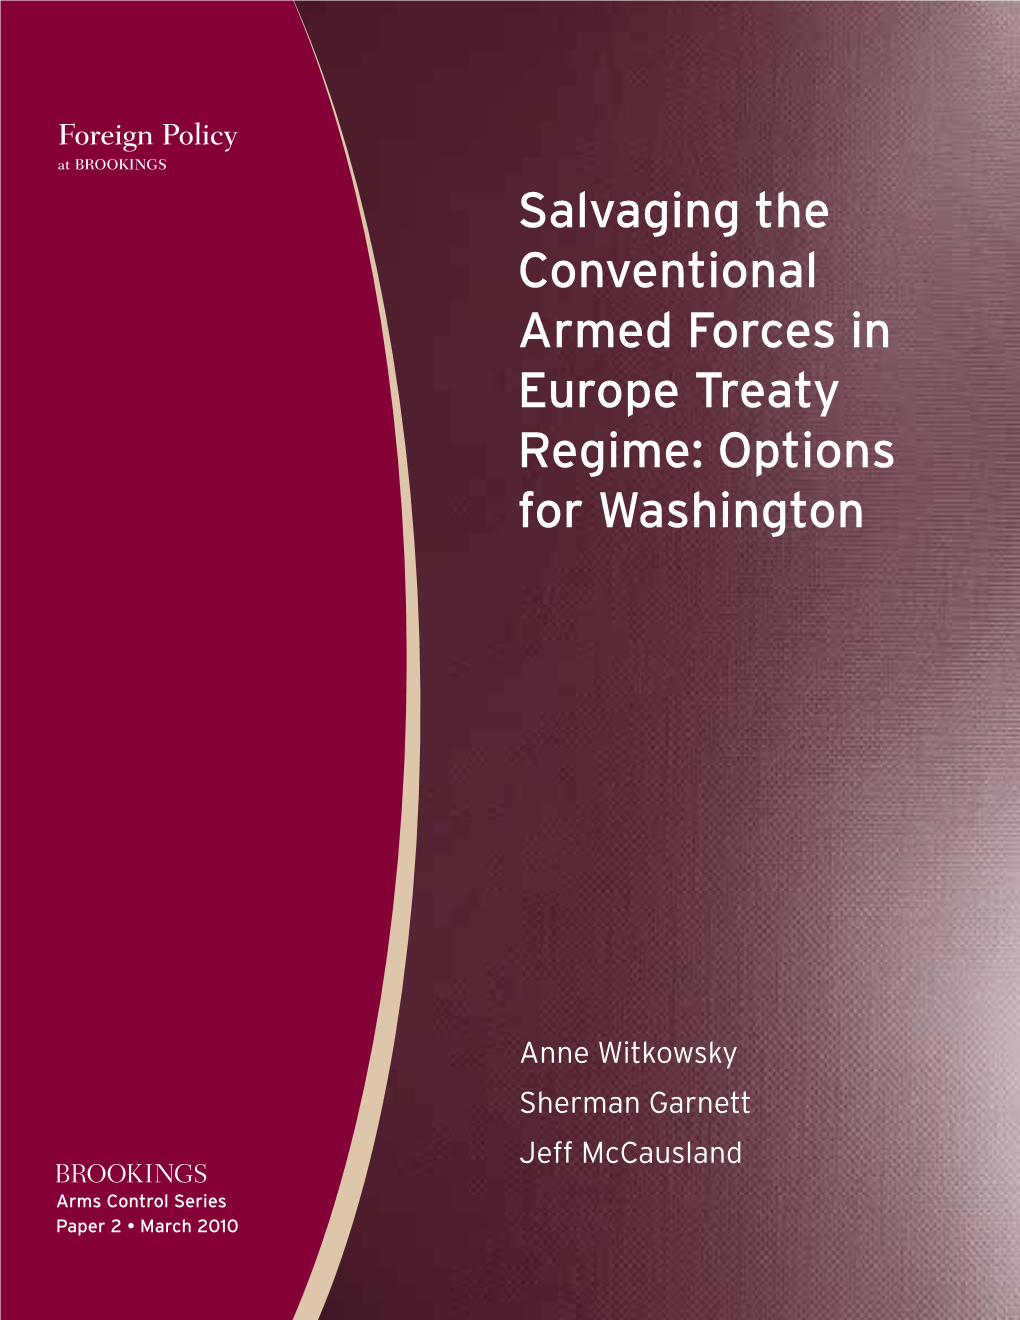 Salvaging the Conventional Armed Forces in Europe Treaty Regime: Options for Washington